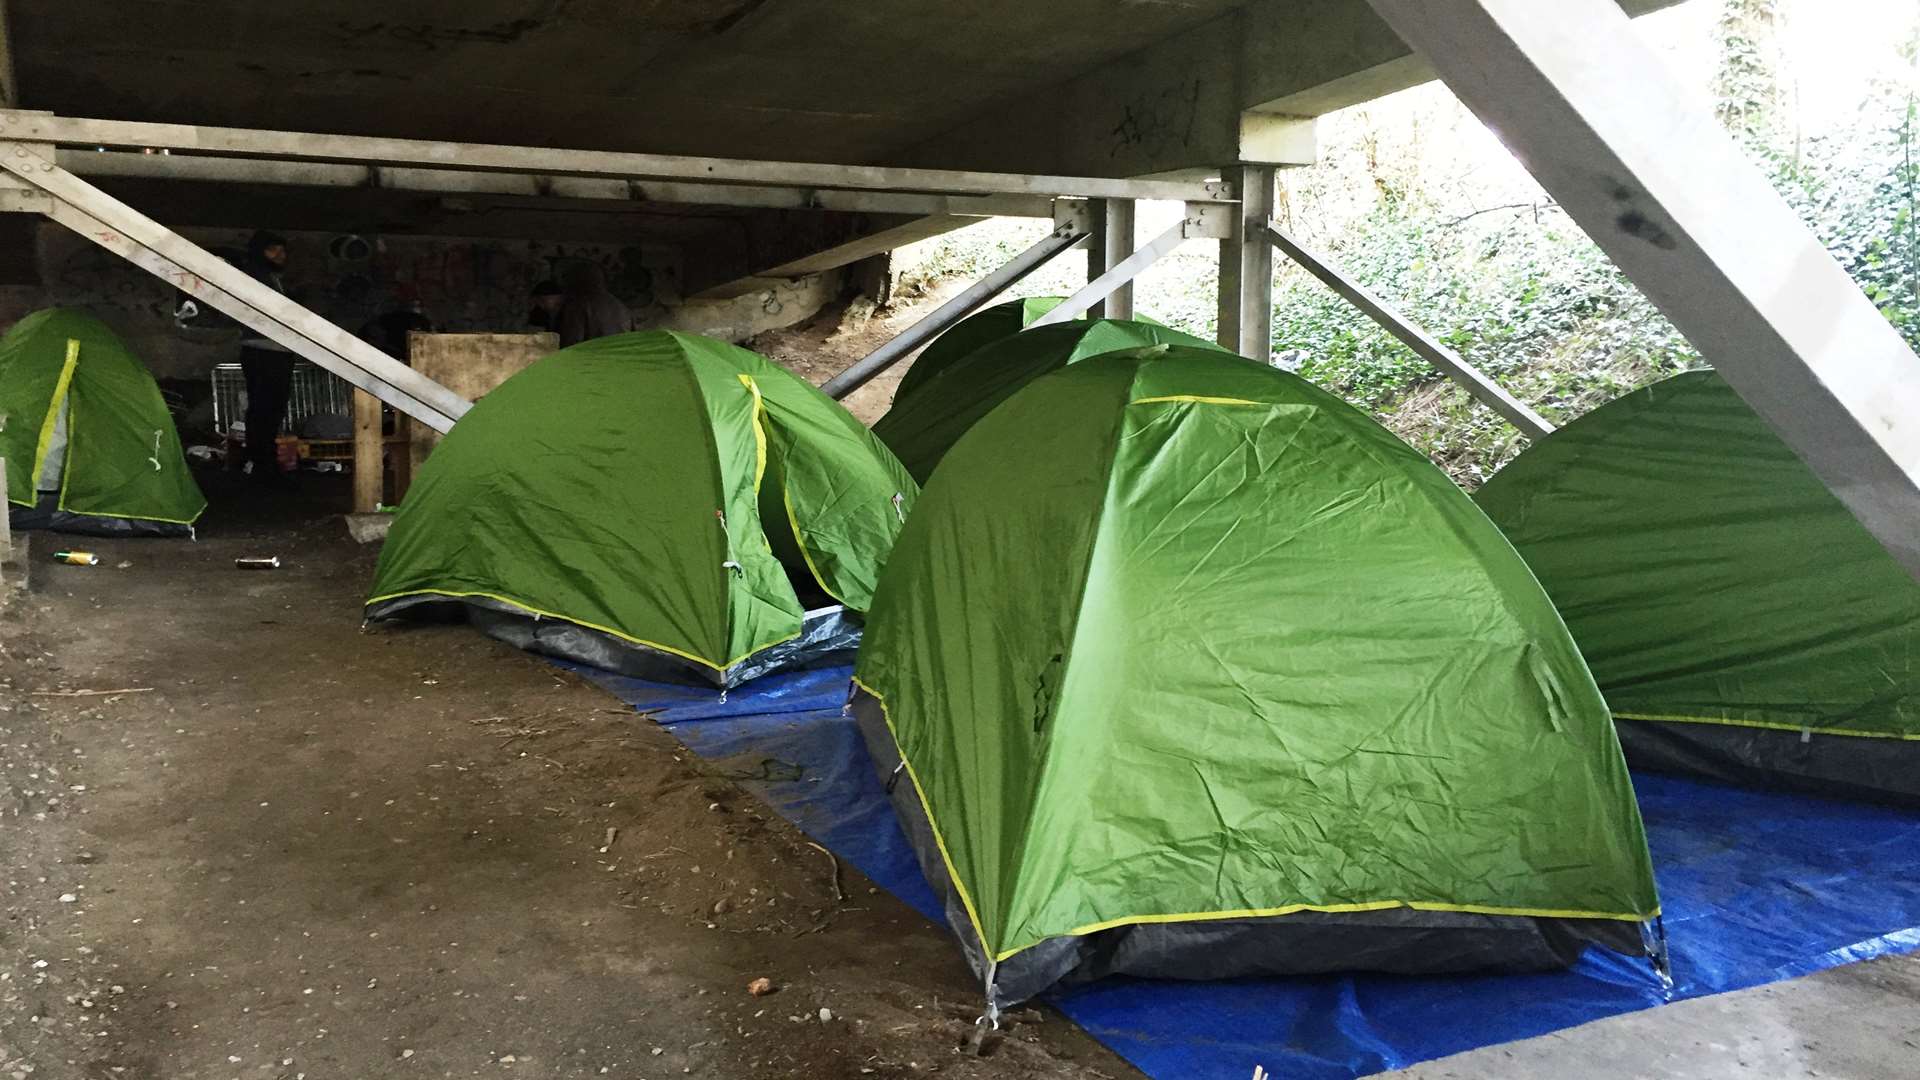 Homeless group had set up camp under the council car park ramp